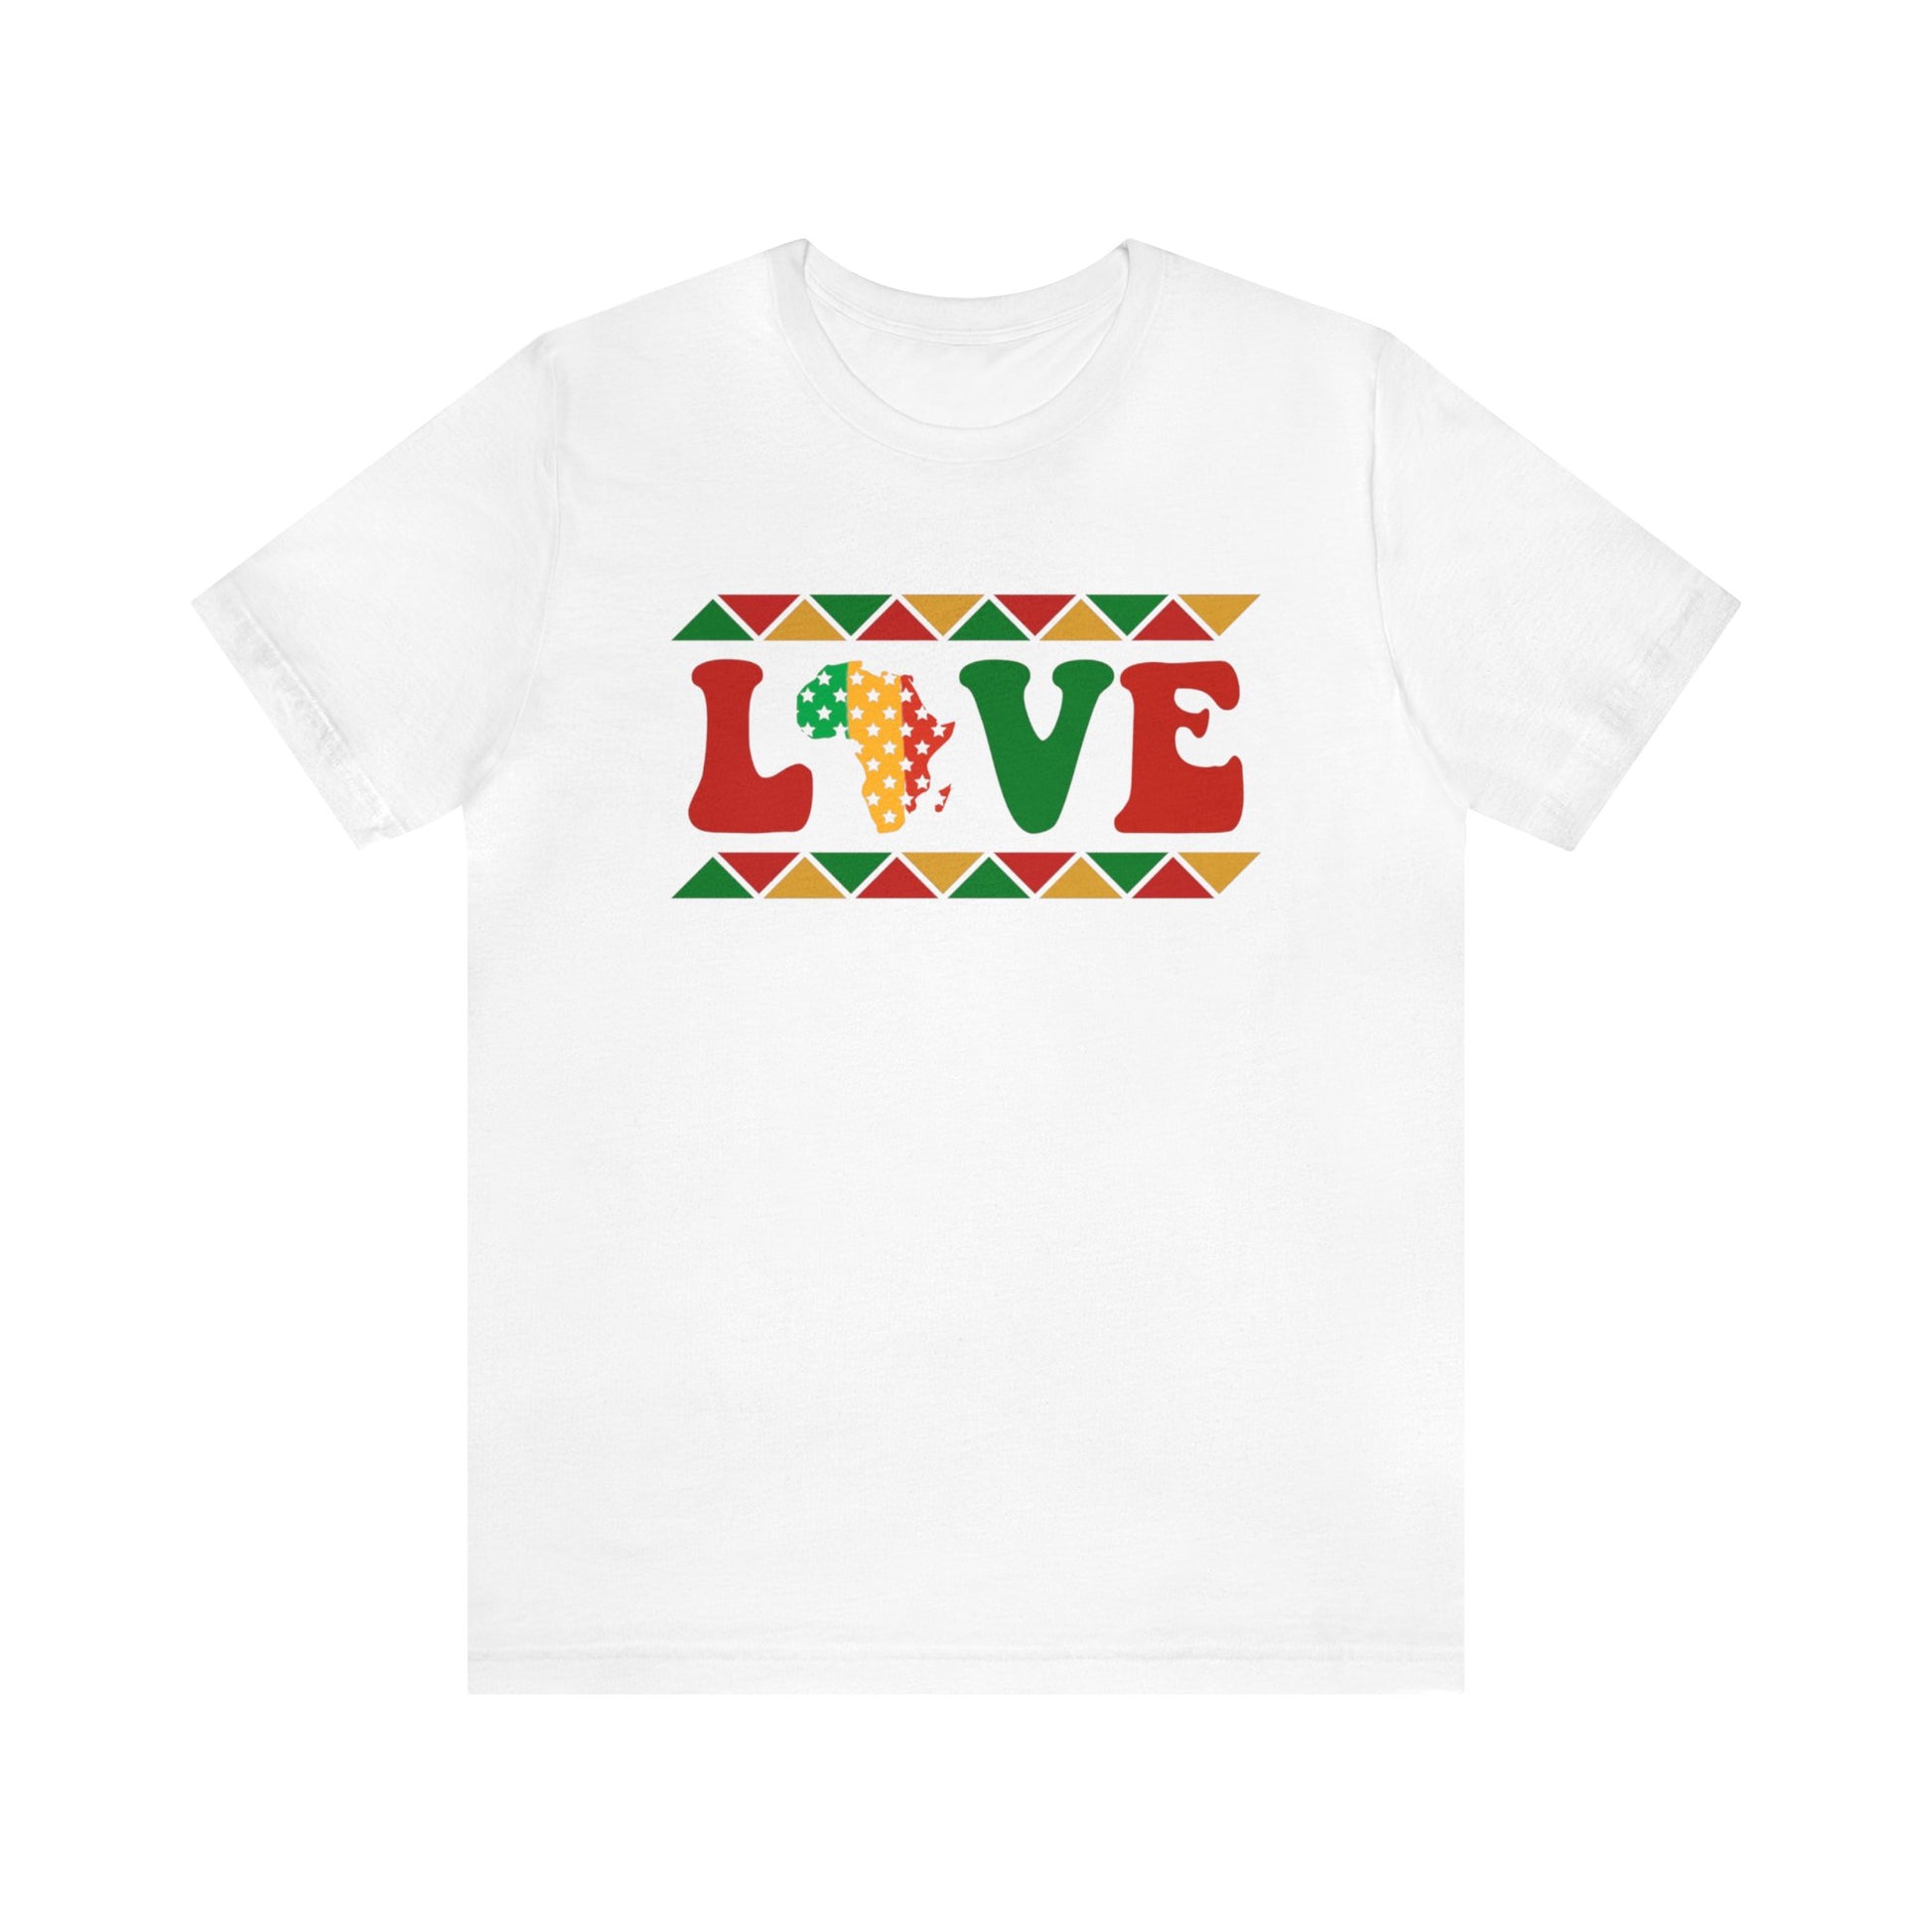 White Unisex Jersey Short Sleeve Tee saying "Love" done in colors Green, Yellow, and Red w/African Continent in place of O